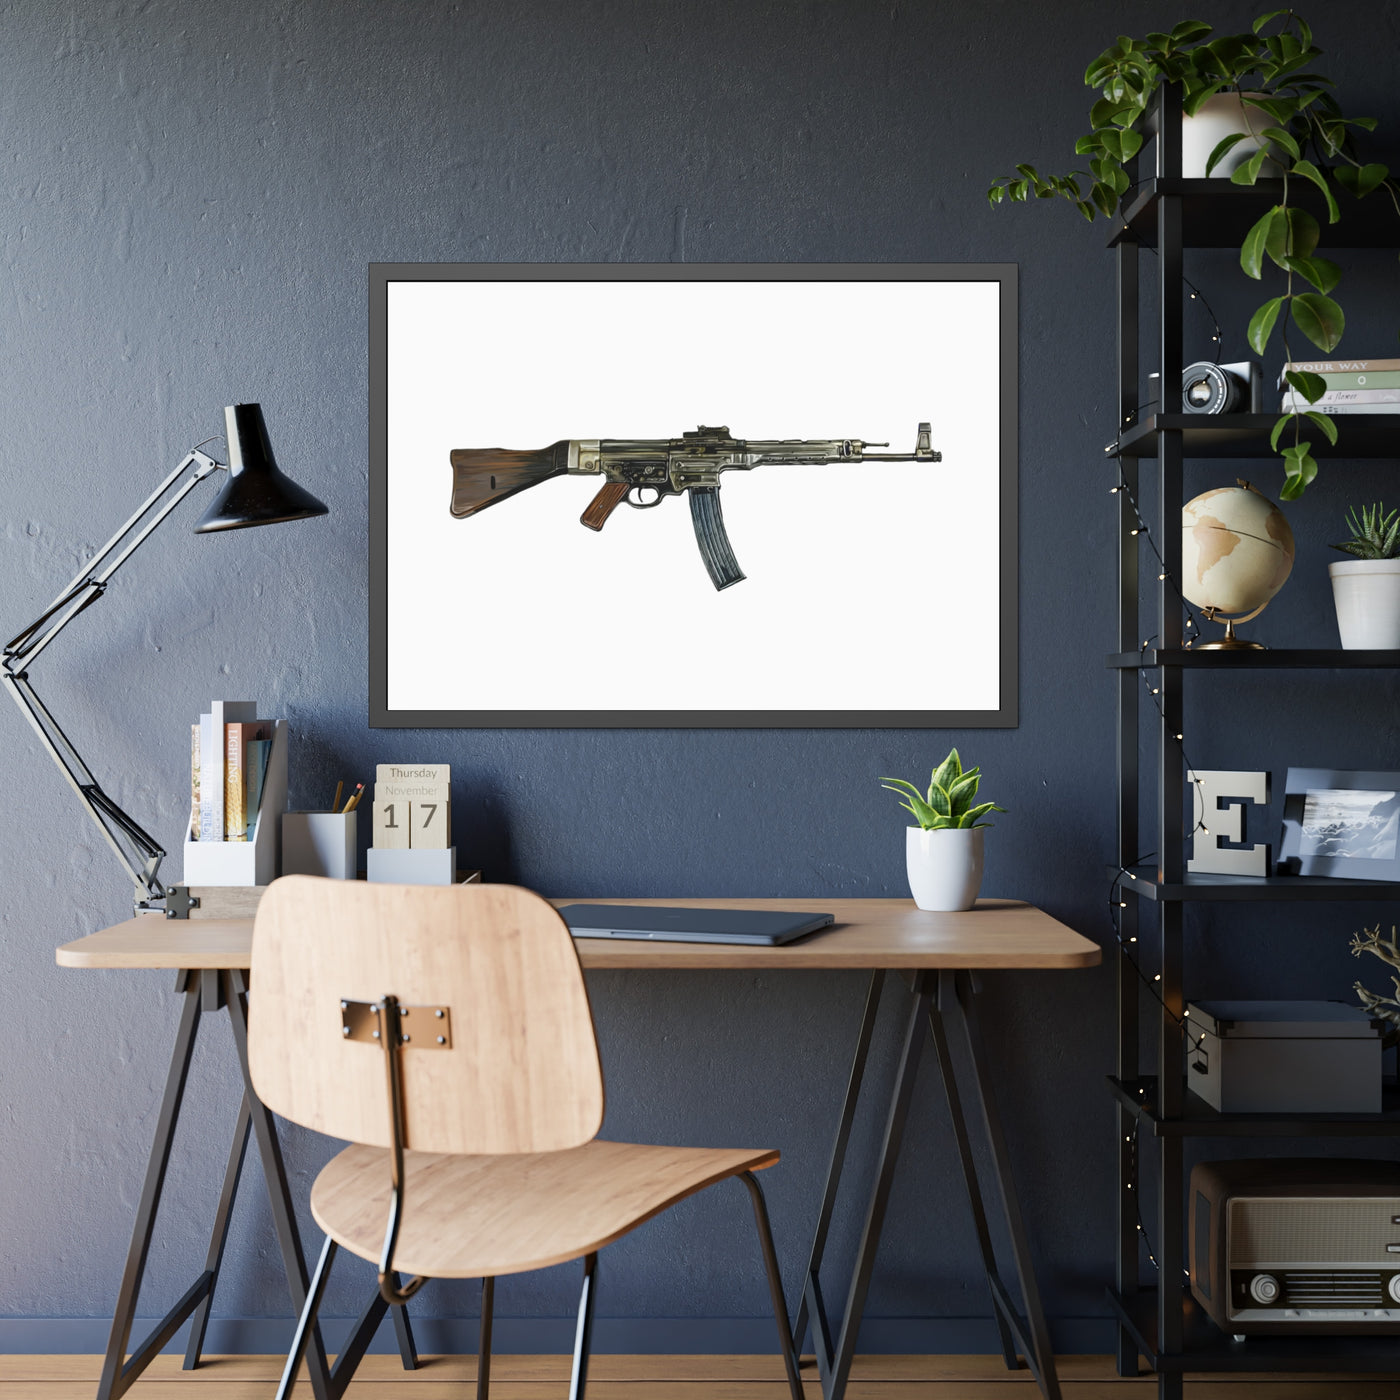 WWII German Assault Rifle - Just The Piece - Black Frame - Value Collection